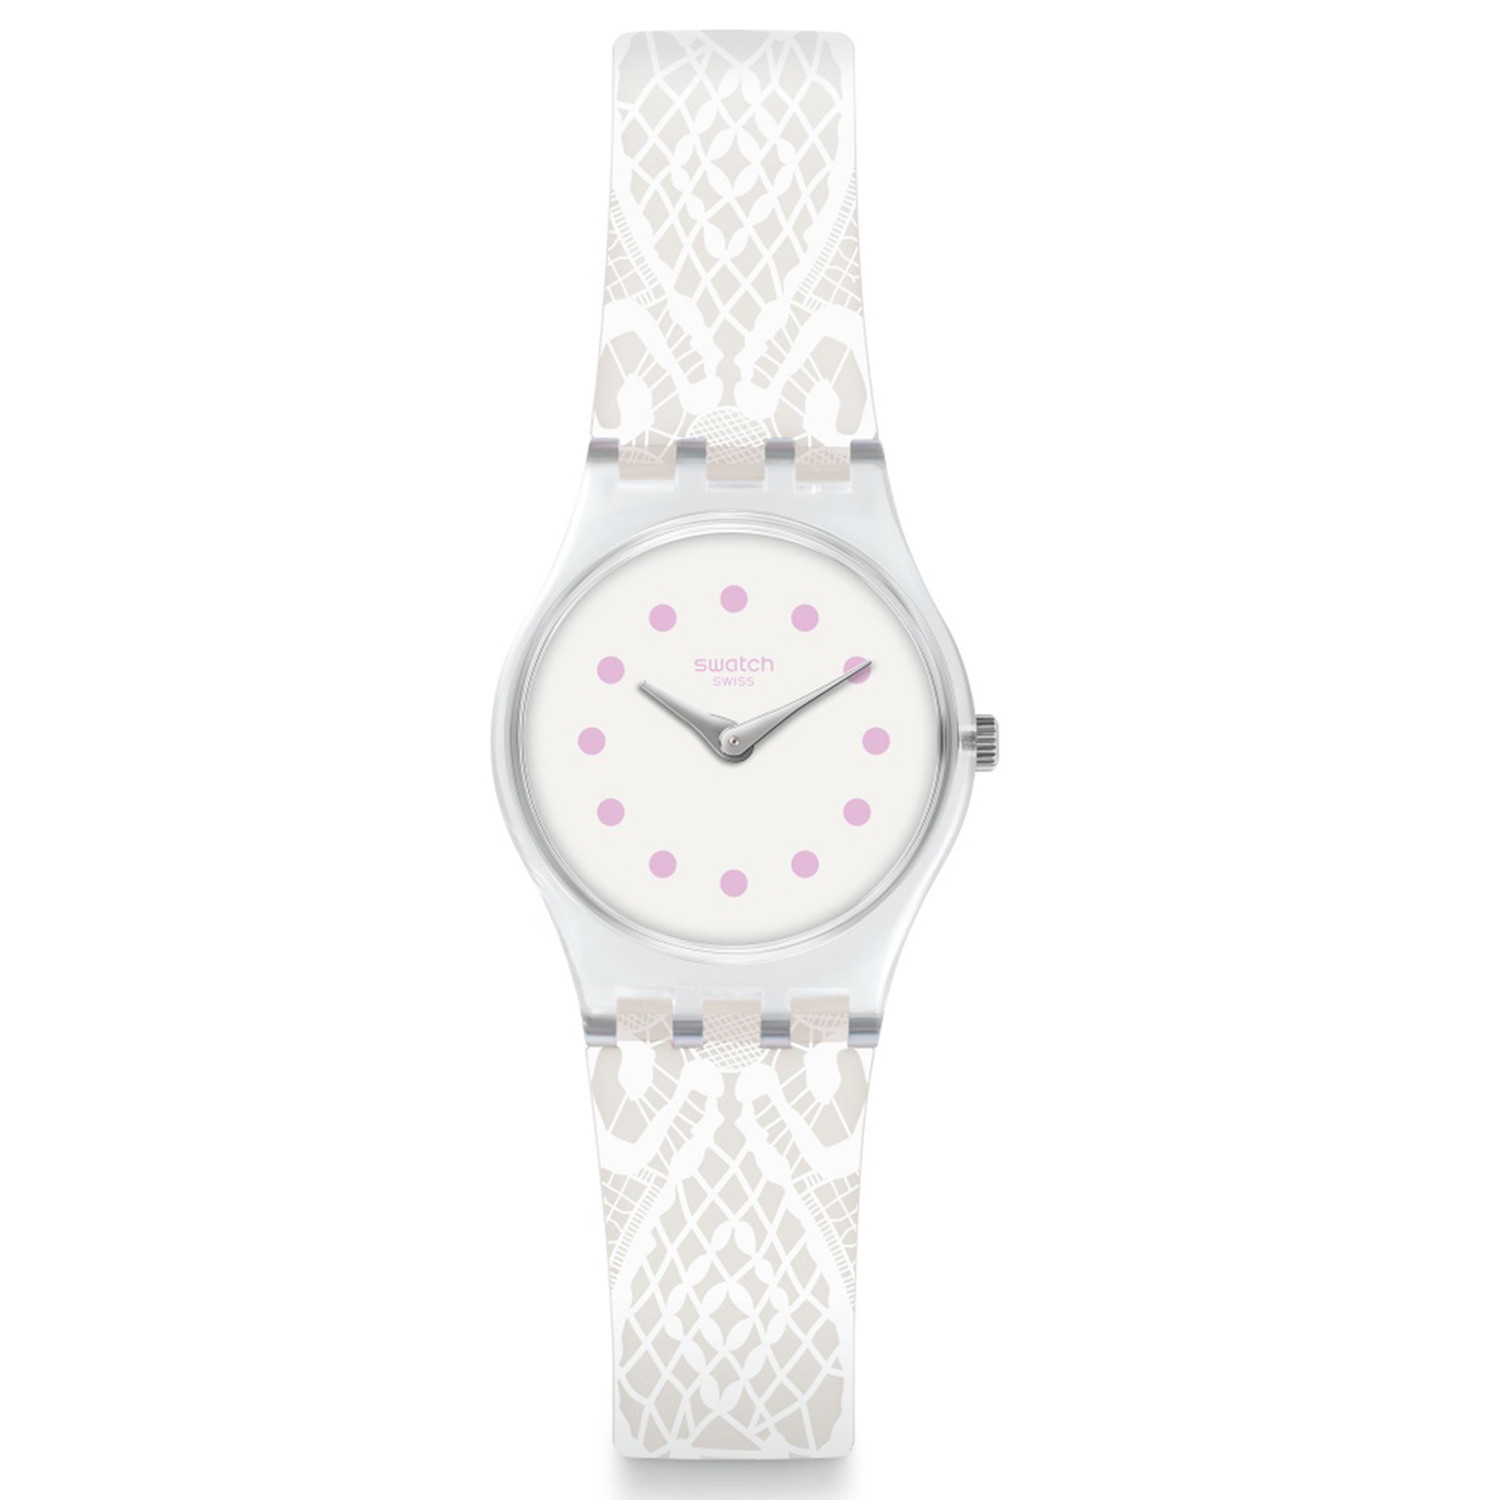 Montre femme Swatch Dentellina
collection I Love Your Folk